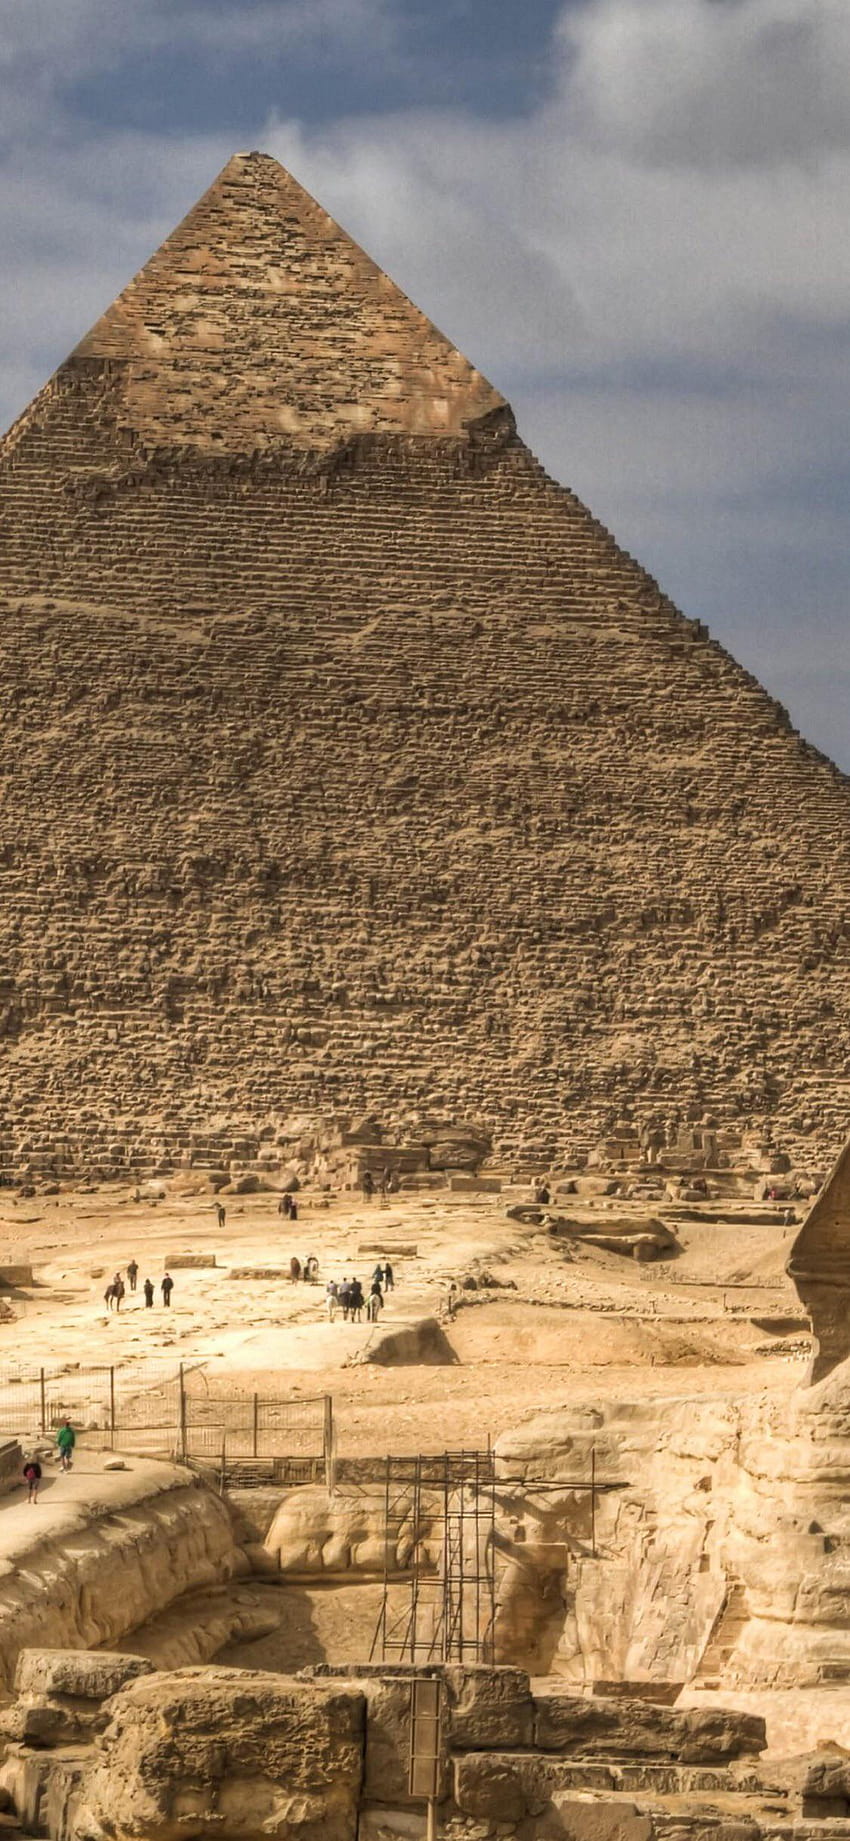 Taken from my country Egypt, egypt pyramid iphone HD phone wallpaper |  Pxfuel